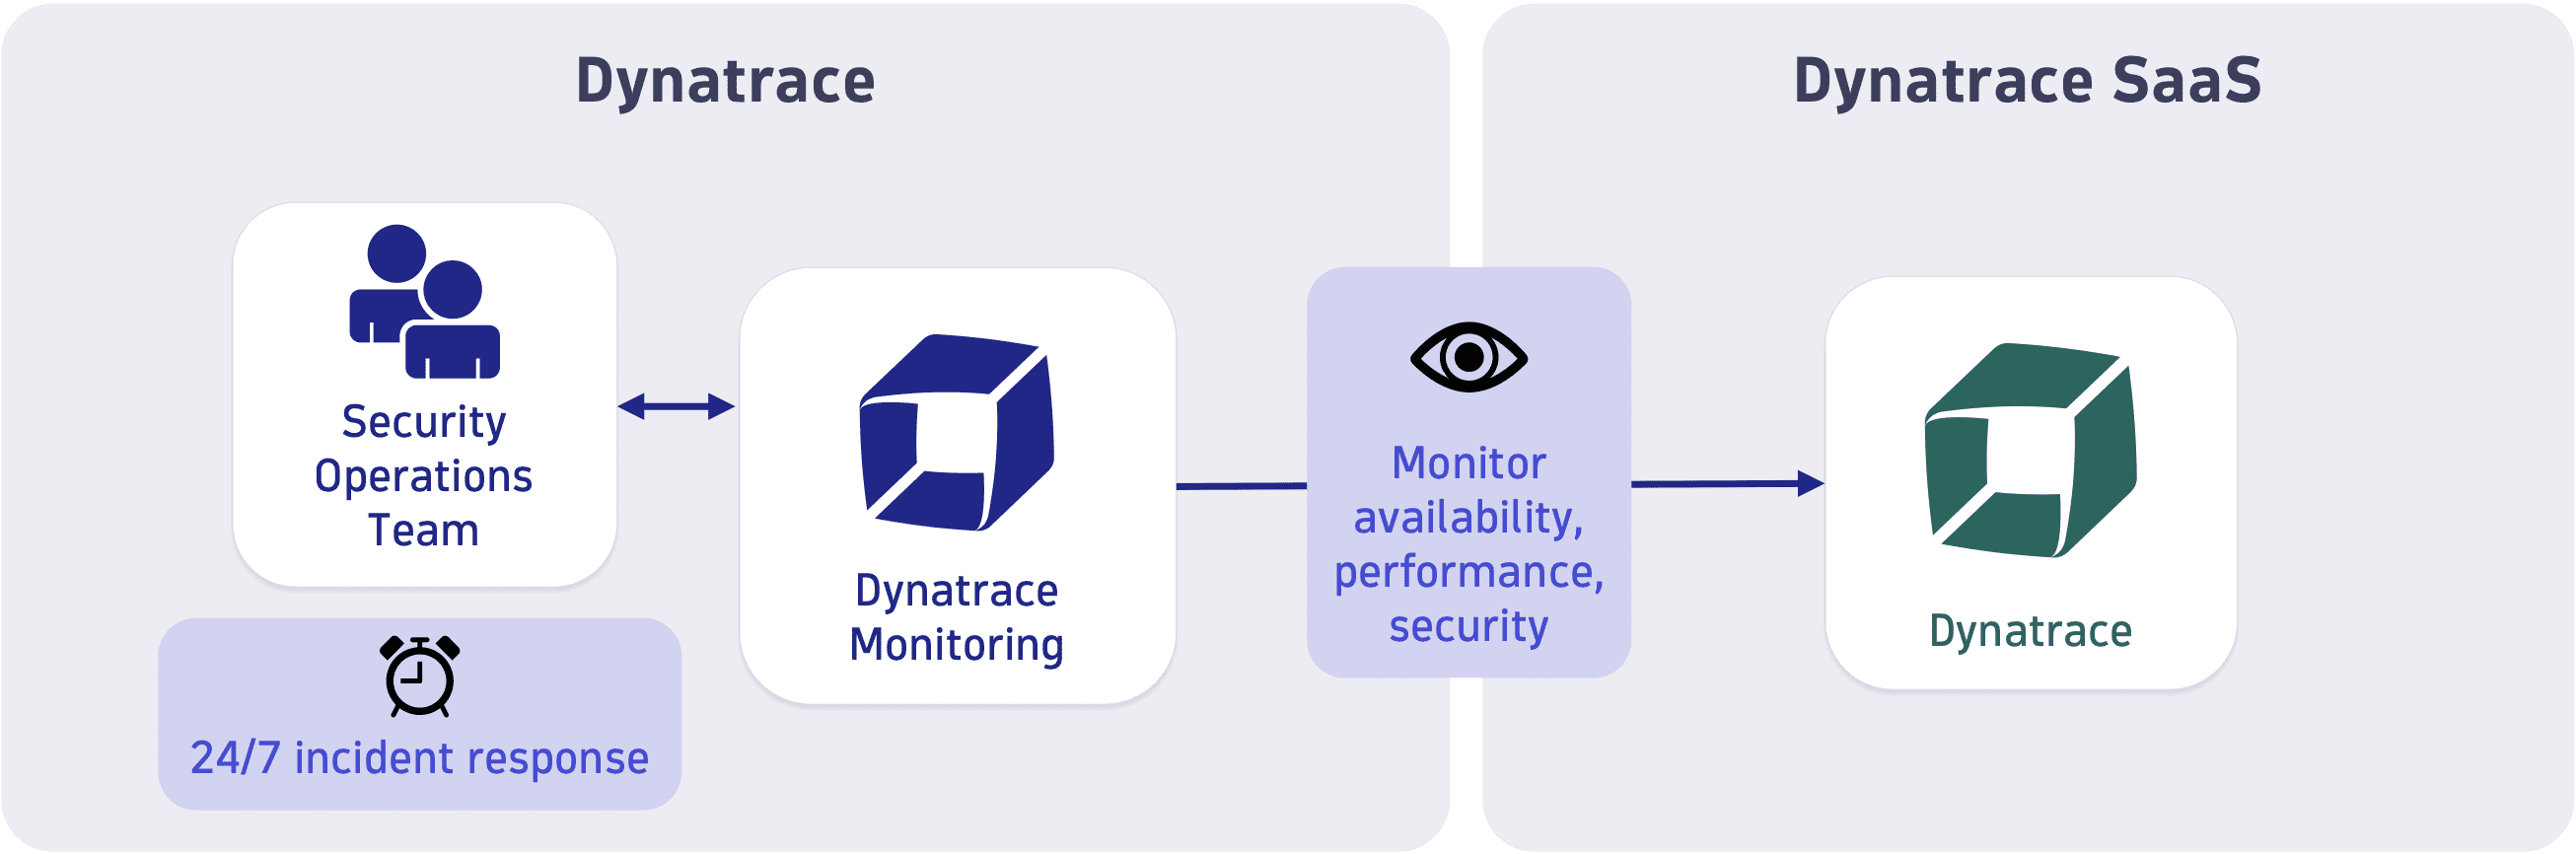 dynatrace-data-security-infrastructure-monitoring